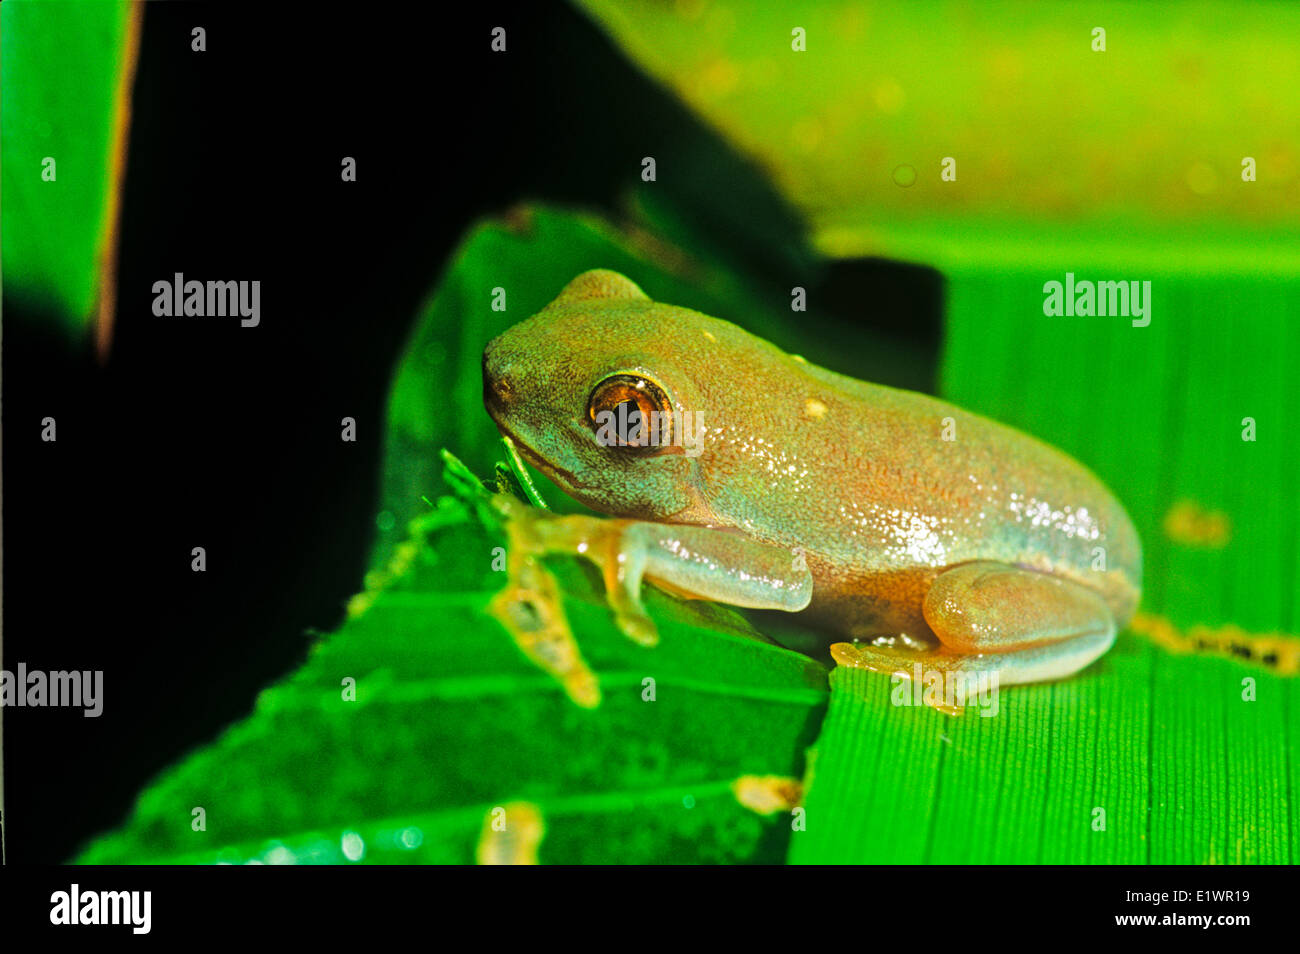 Agalychnis callidryas Immature stage Red-eyed Leaf Frog Amphibian Hylidae Tree Frogs Amphibia Costa Rica Frogs Toads Anura Stock Photo